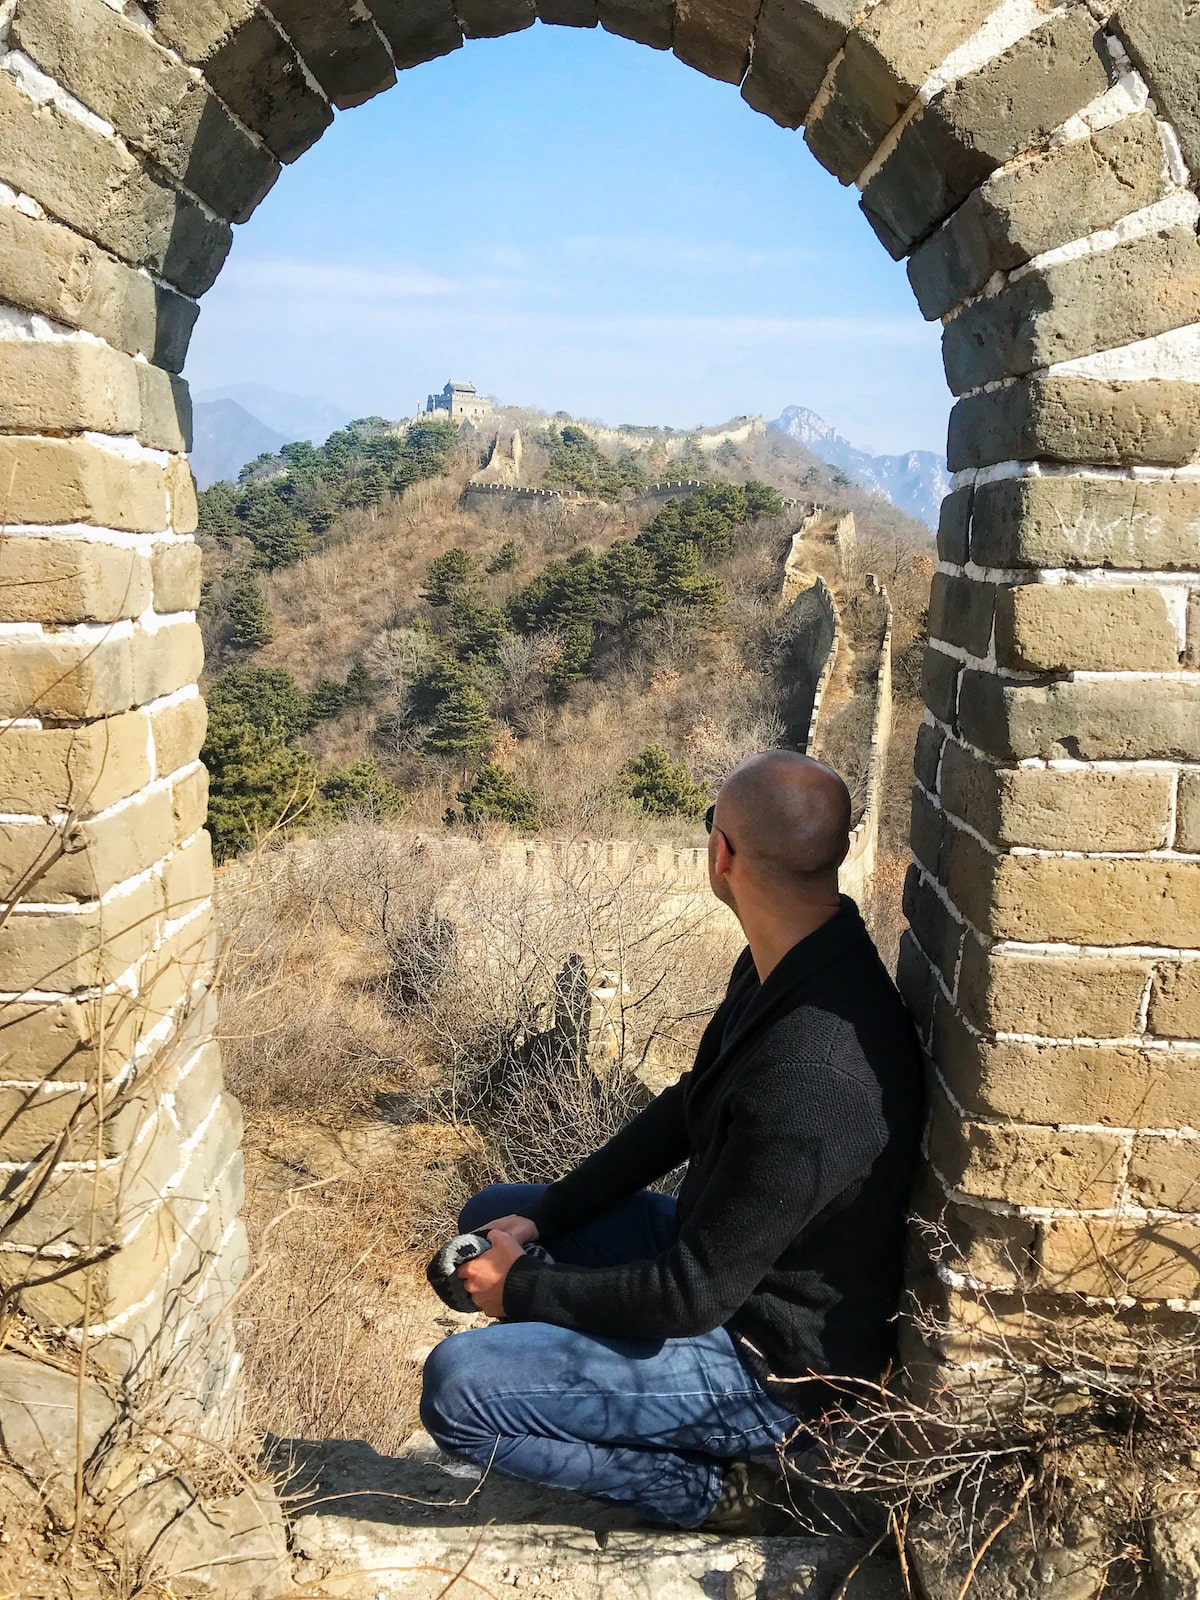 A male tourist looks out into The Great Wall of China from an archway on a sunny day in Beijing.